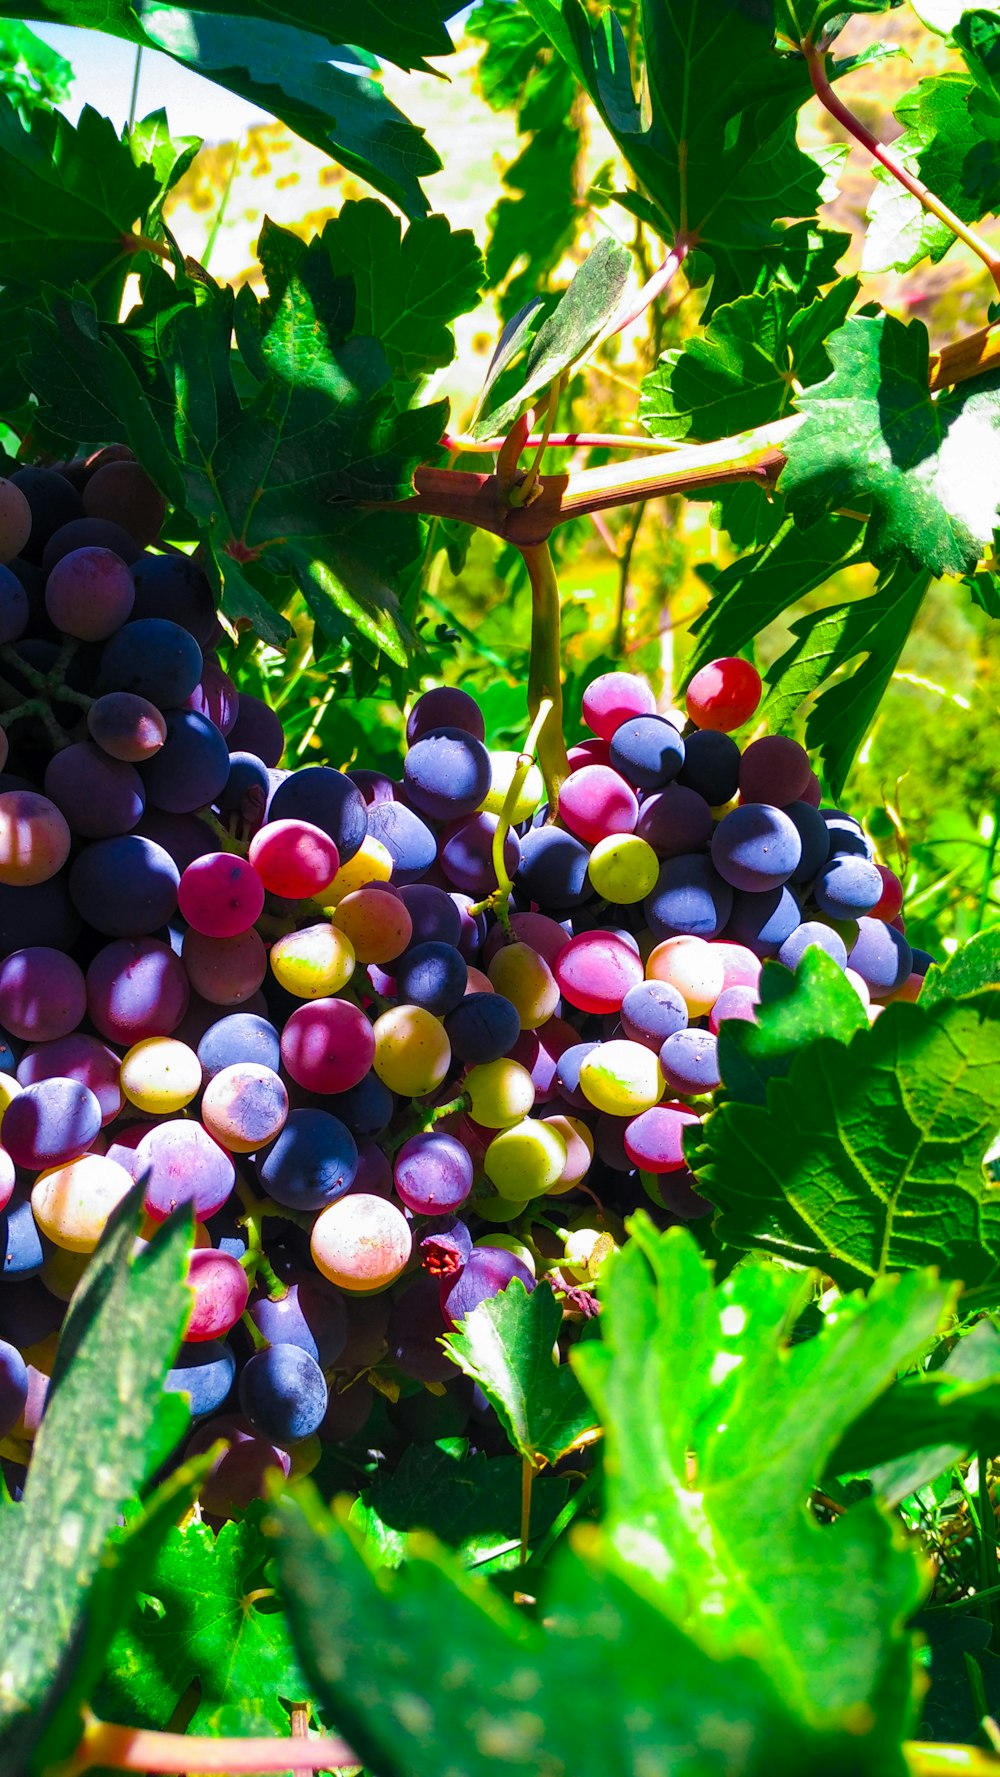 purple and green round fruits